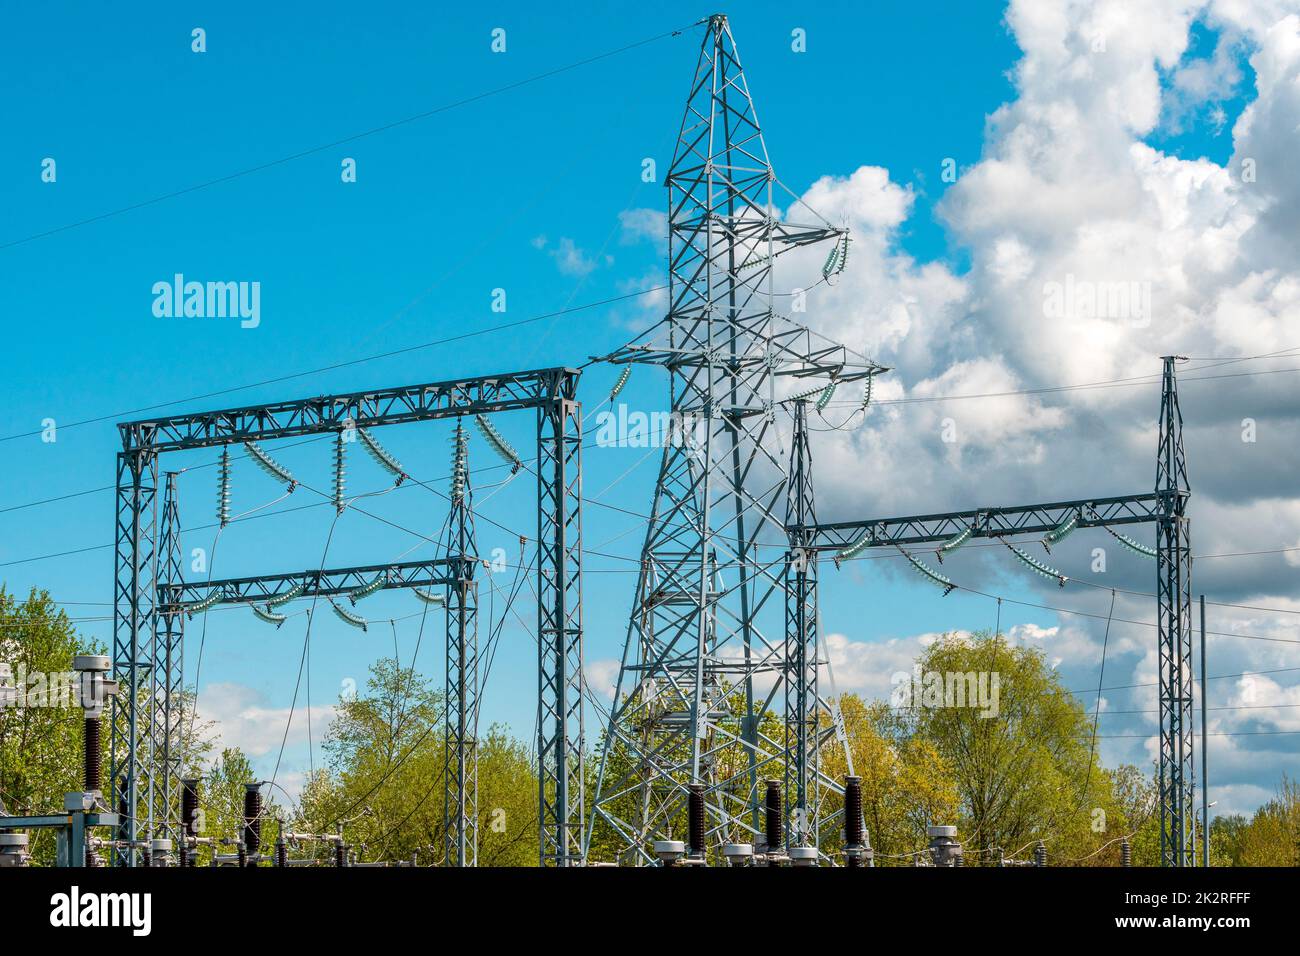 Electric and power industry Stock Photo